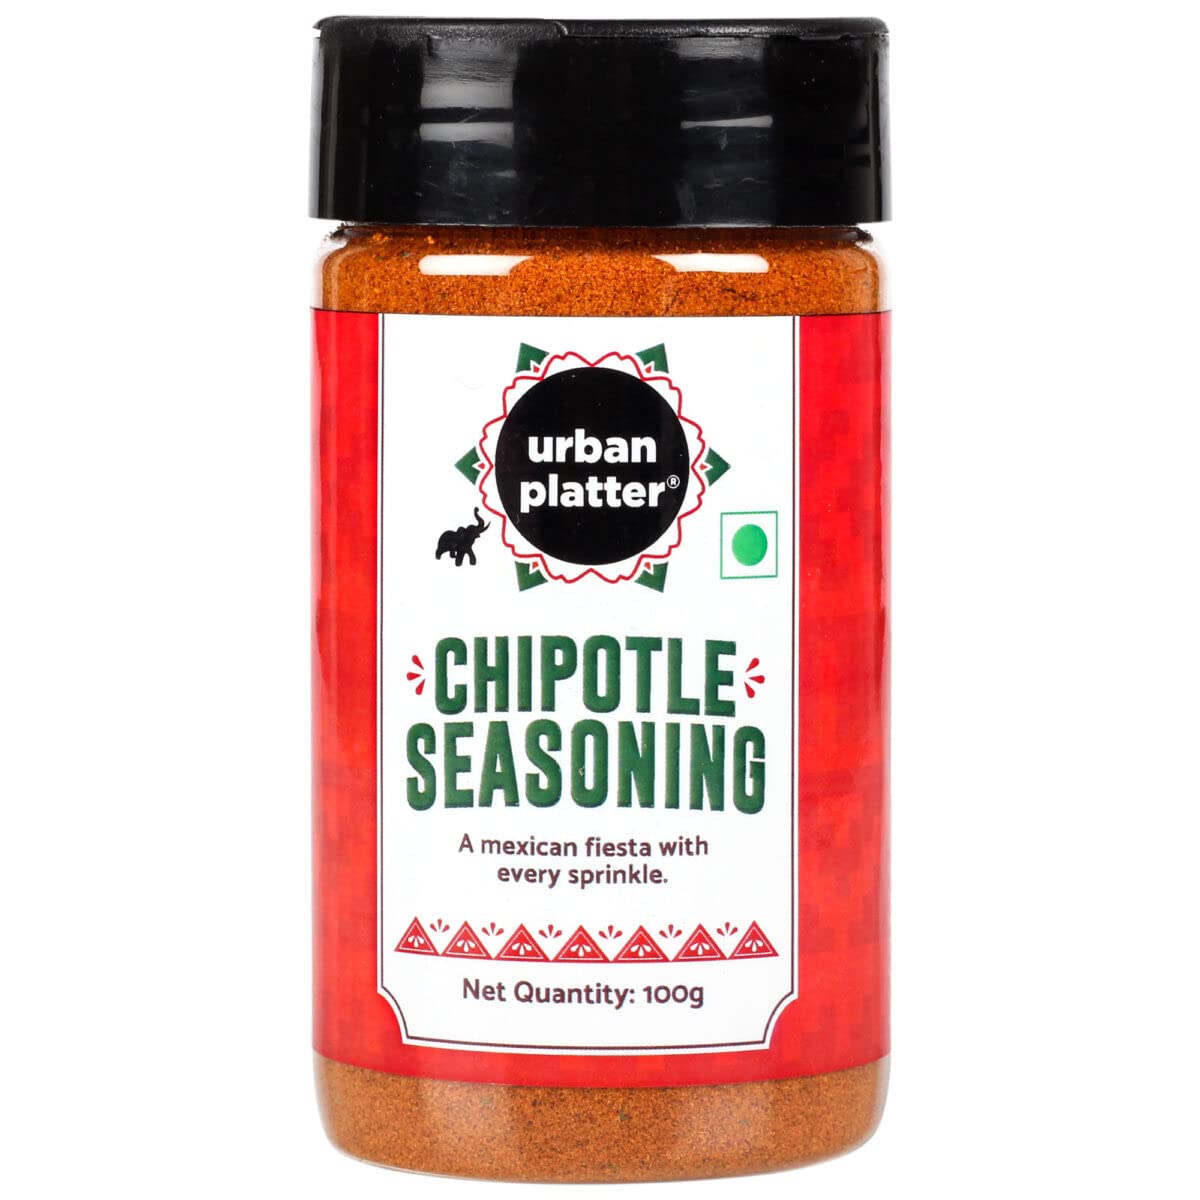 Urban Platter Mexican Chipotle Seasoning, 100g (Authentic Mexican Style Seasoning for Fries, Appetizers, dips and more)